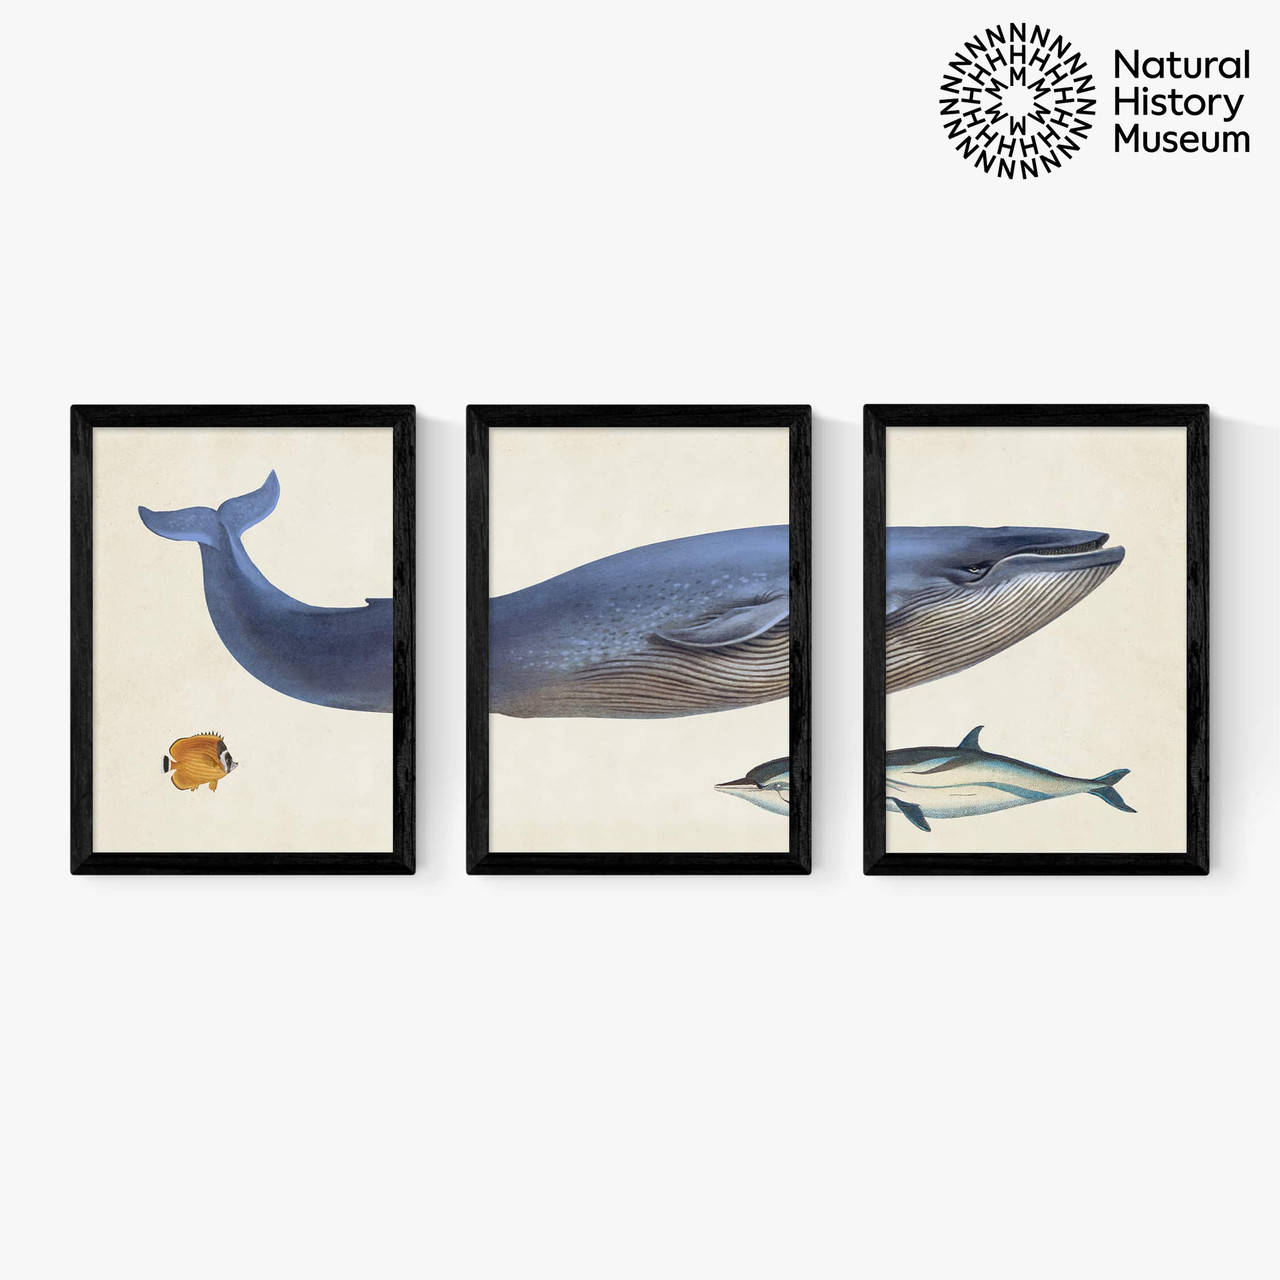 Gallery　Vintage　Museum　Natural　The　Framed　History　Whale　Set　Triptych　by　Art　Wall